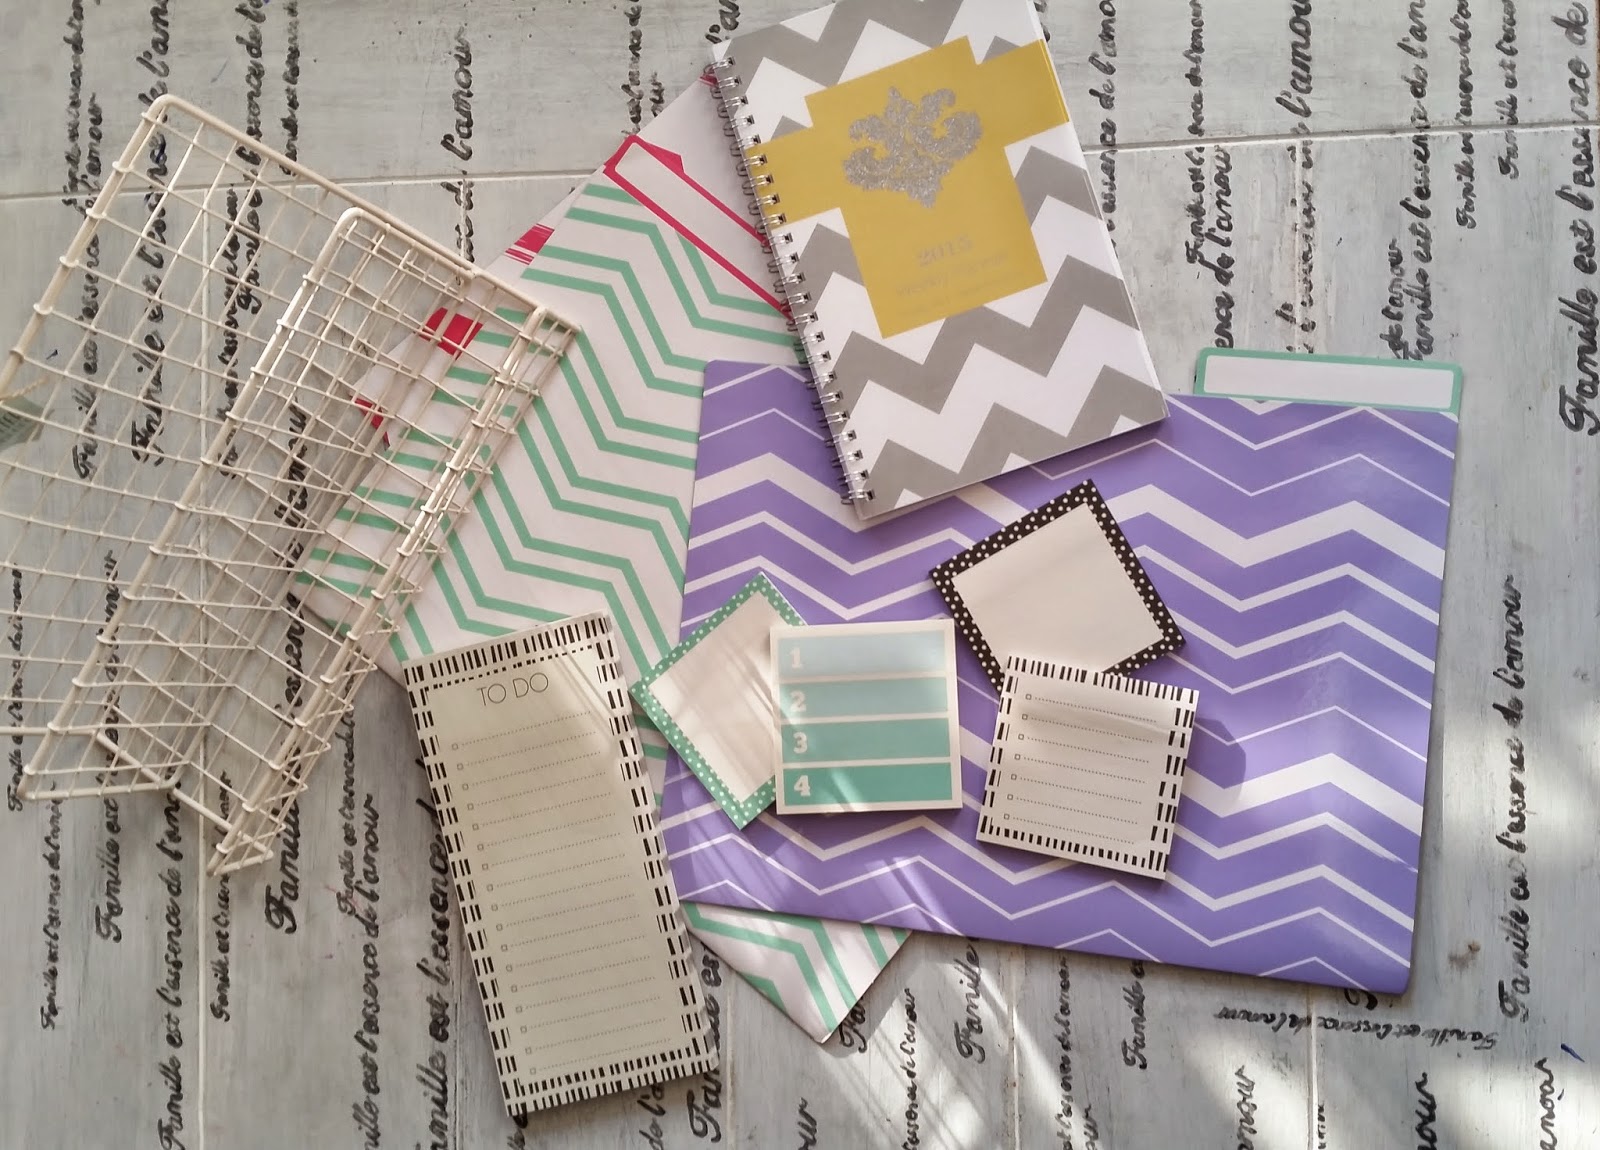 ... : Target Dollar Spot Haul: Stay Organized in 2015 On a Budget